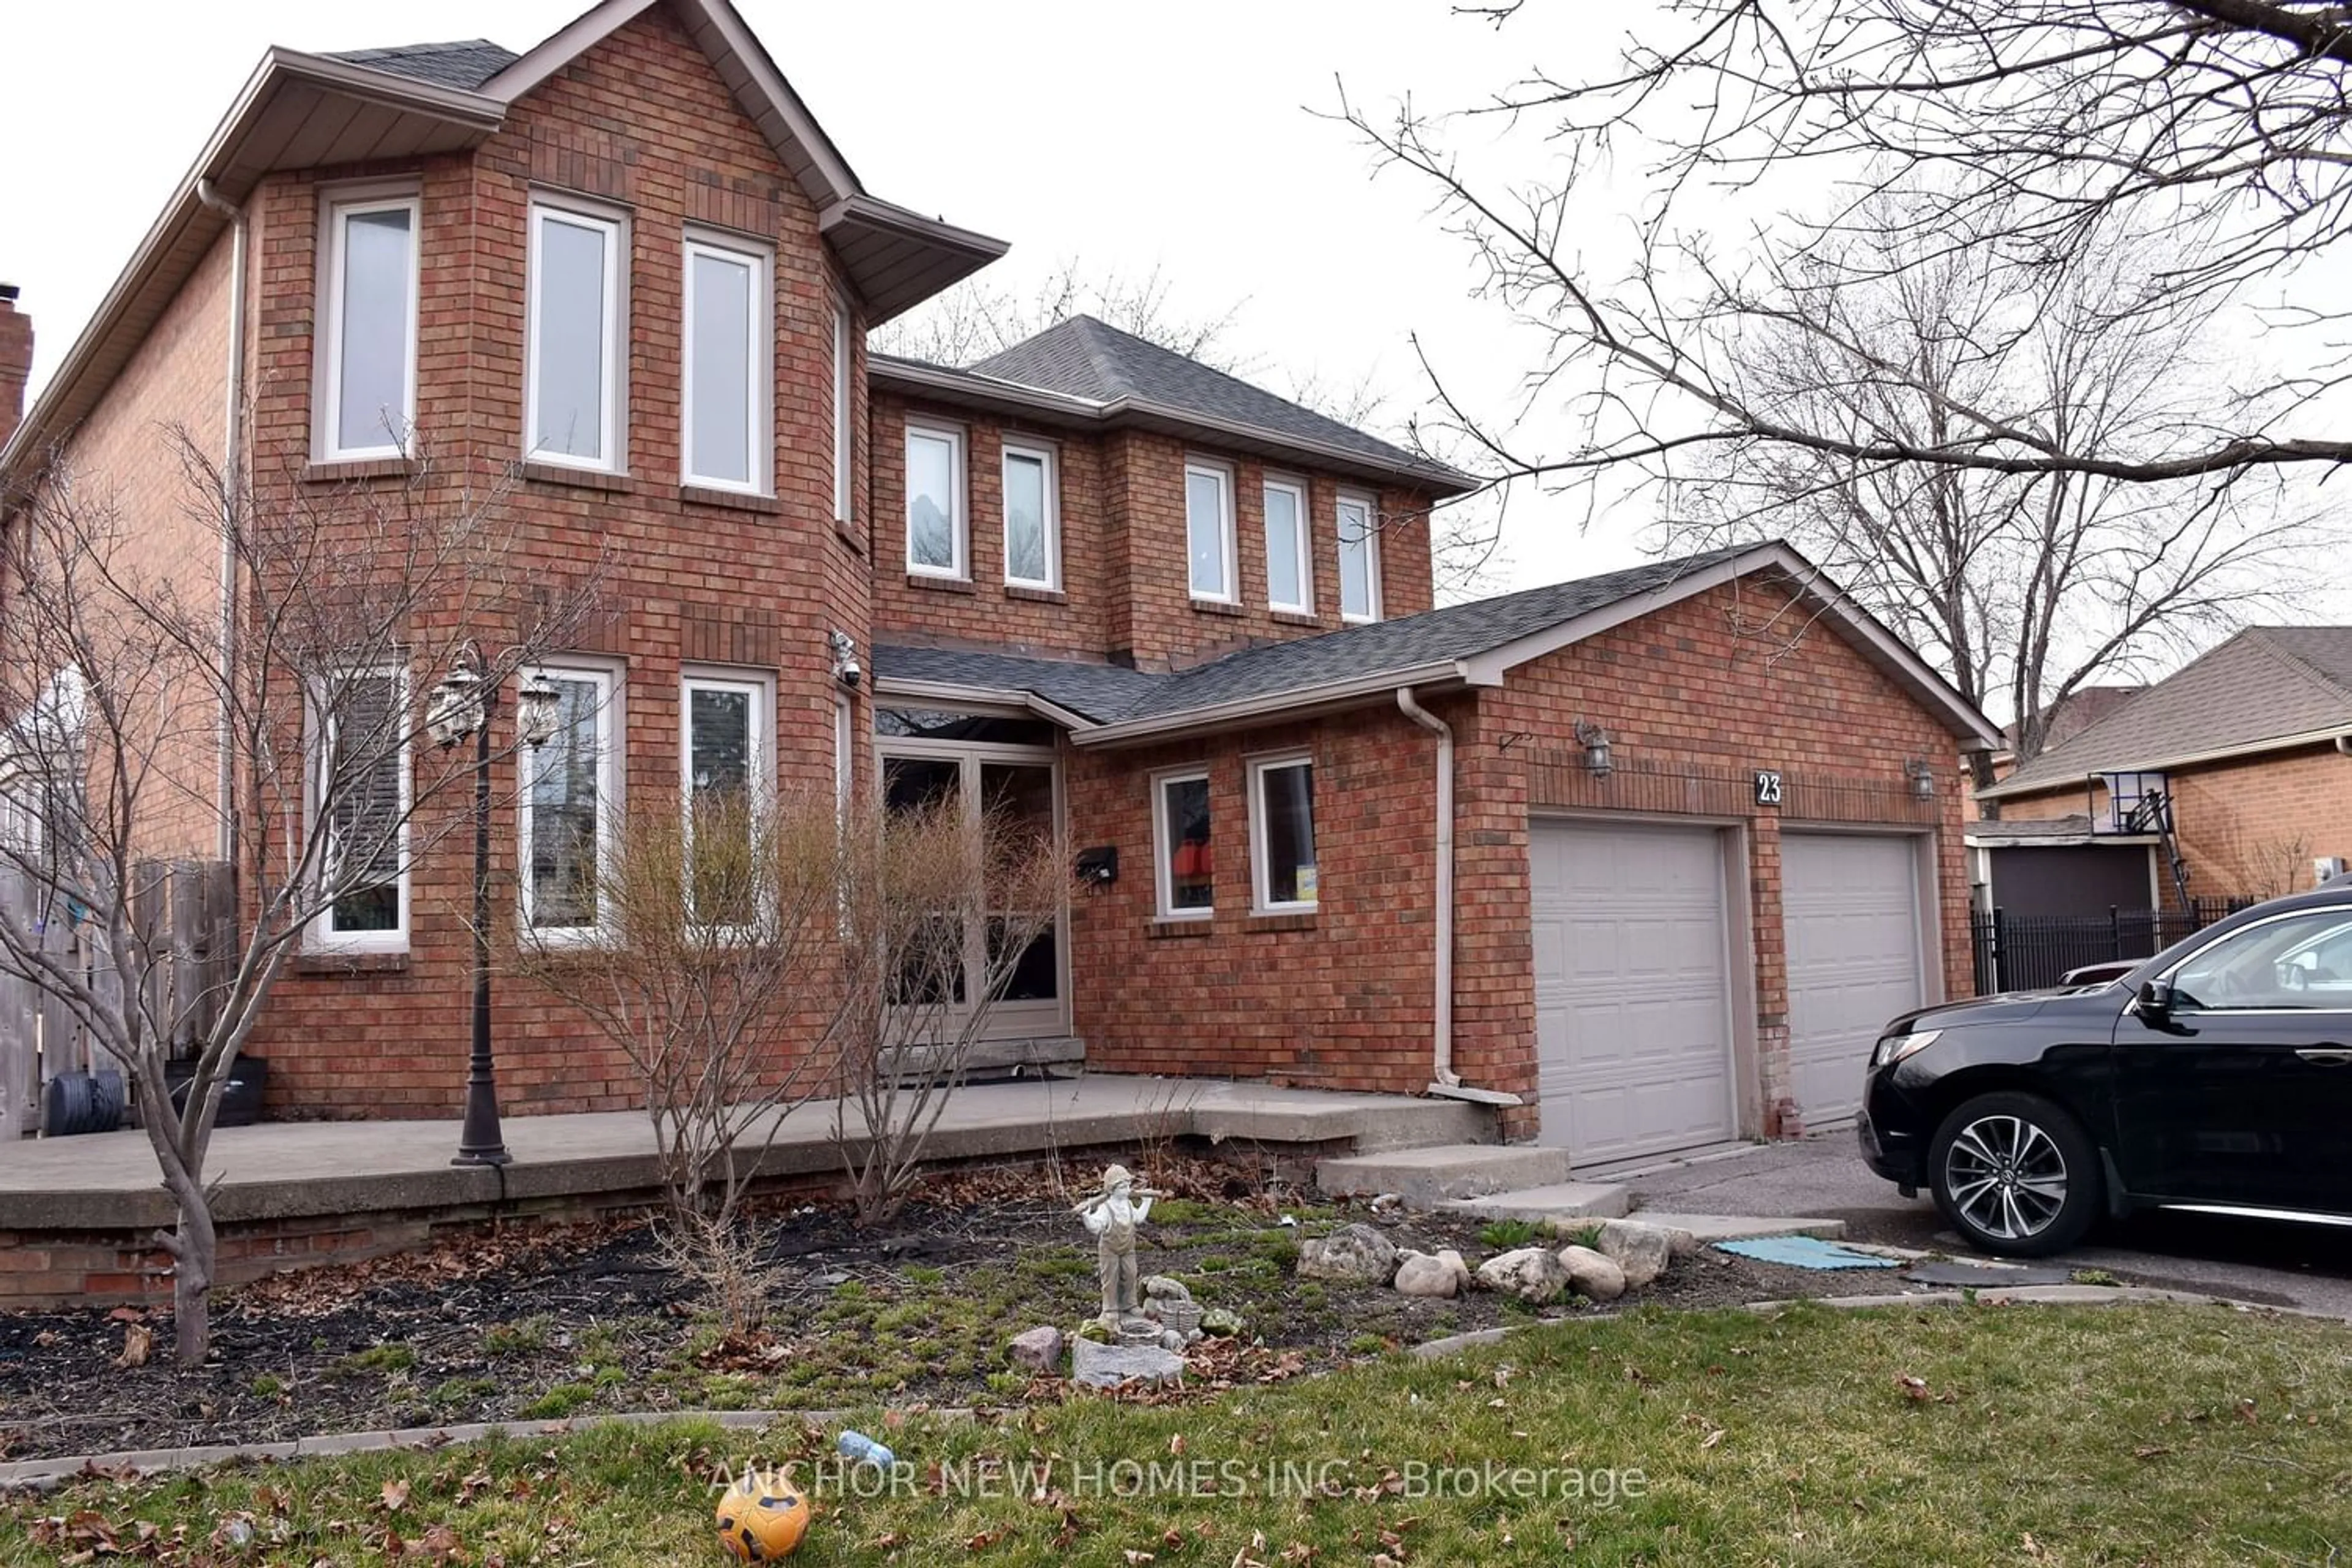 Home with brick exterior material for 23 Chestnut Ave, Brampton Ontario L6X 2A6